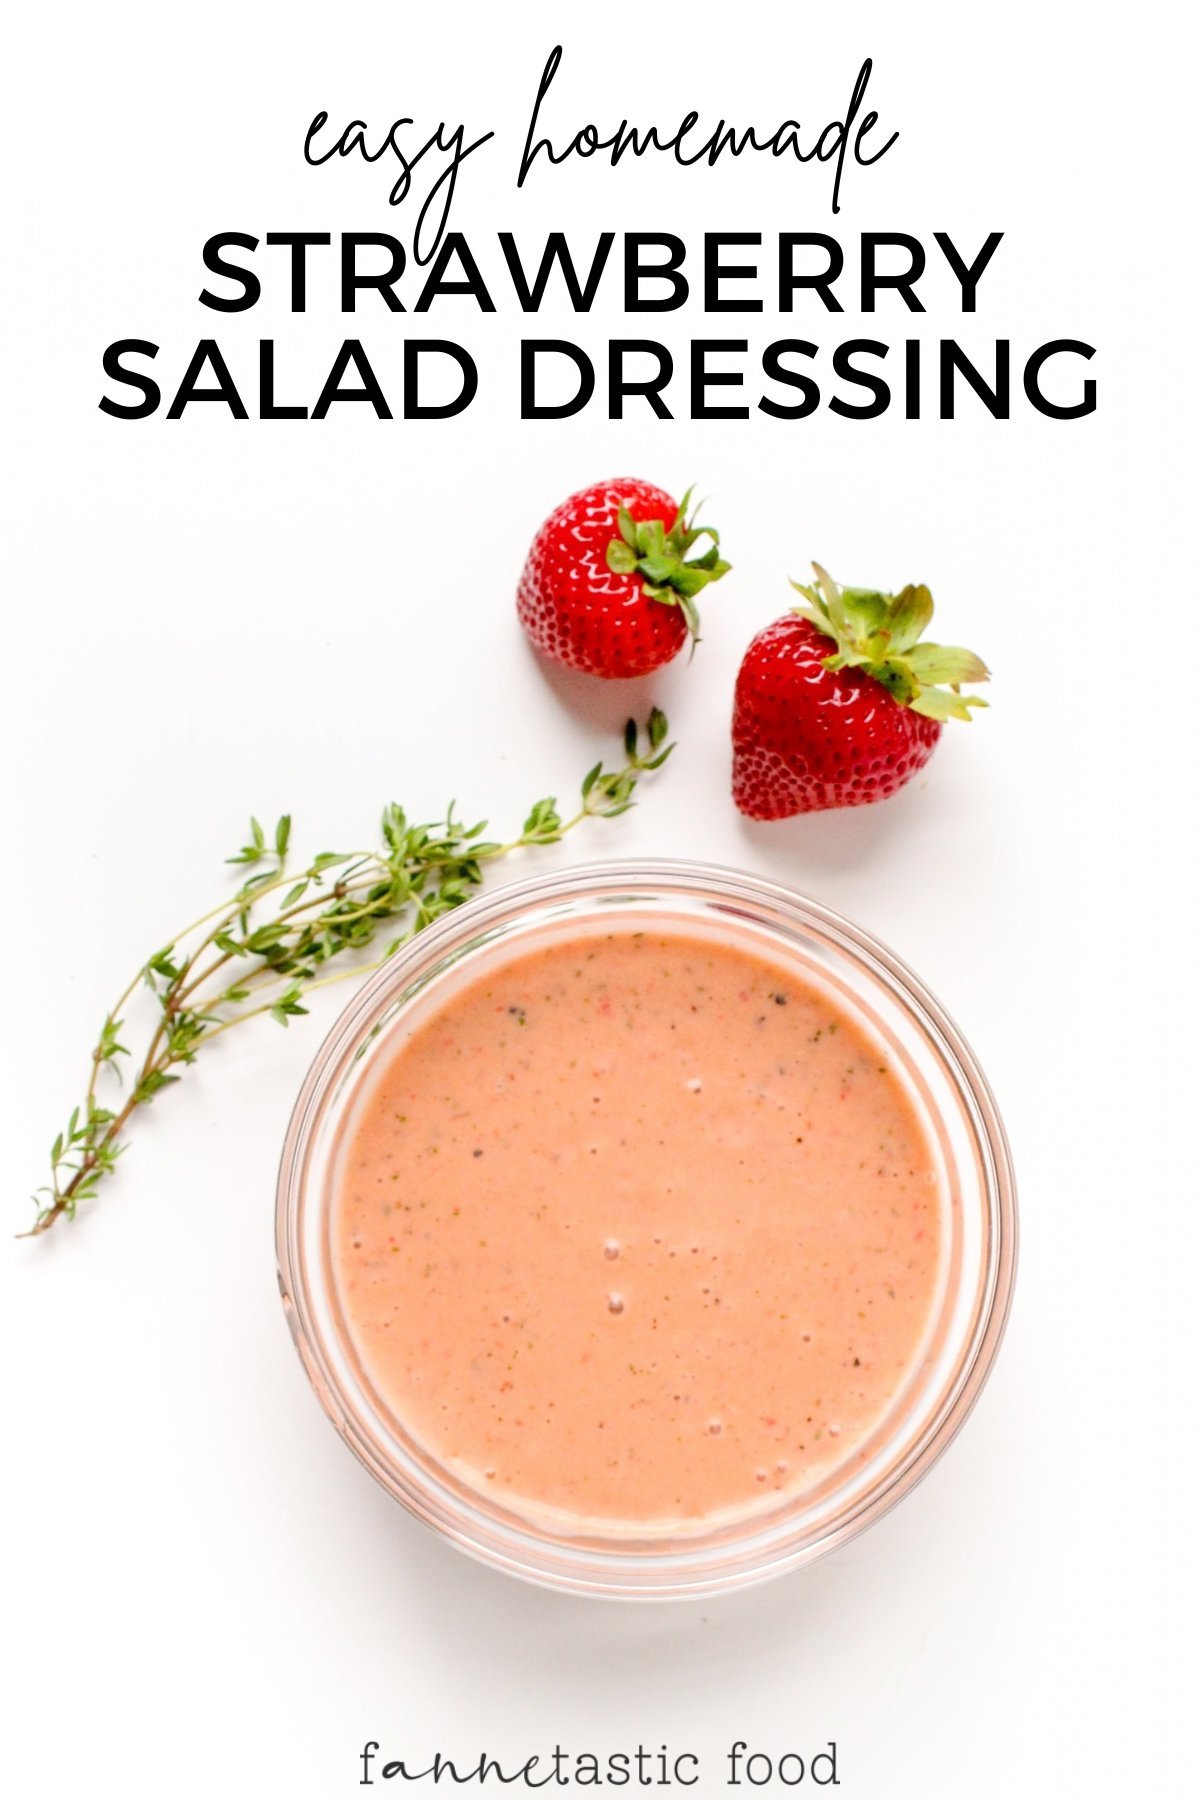 homemade strawberry salad dressing in a glass jar